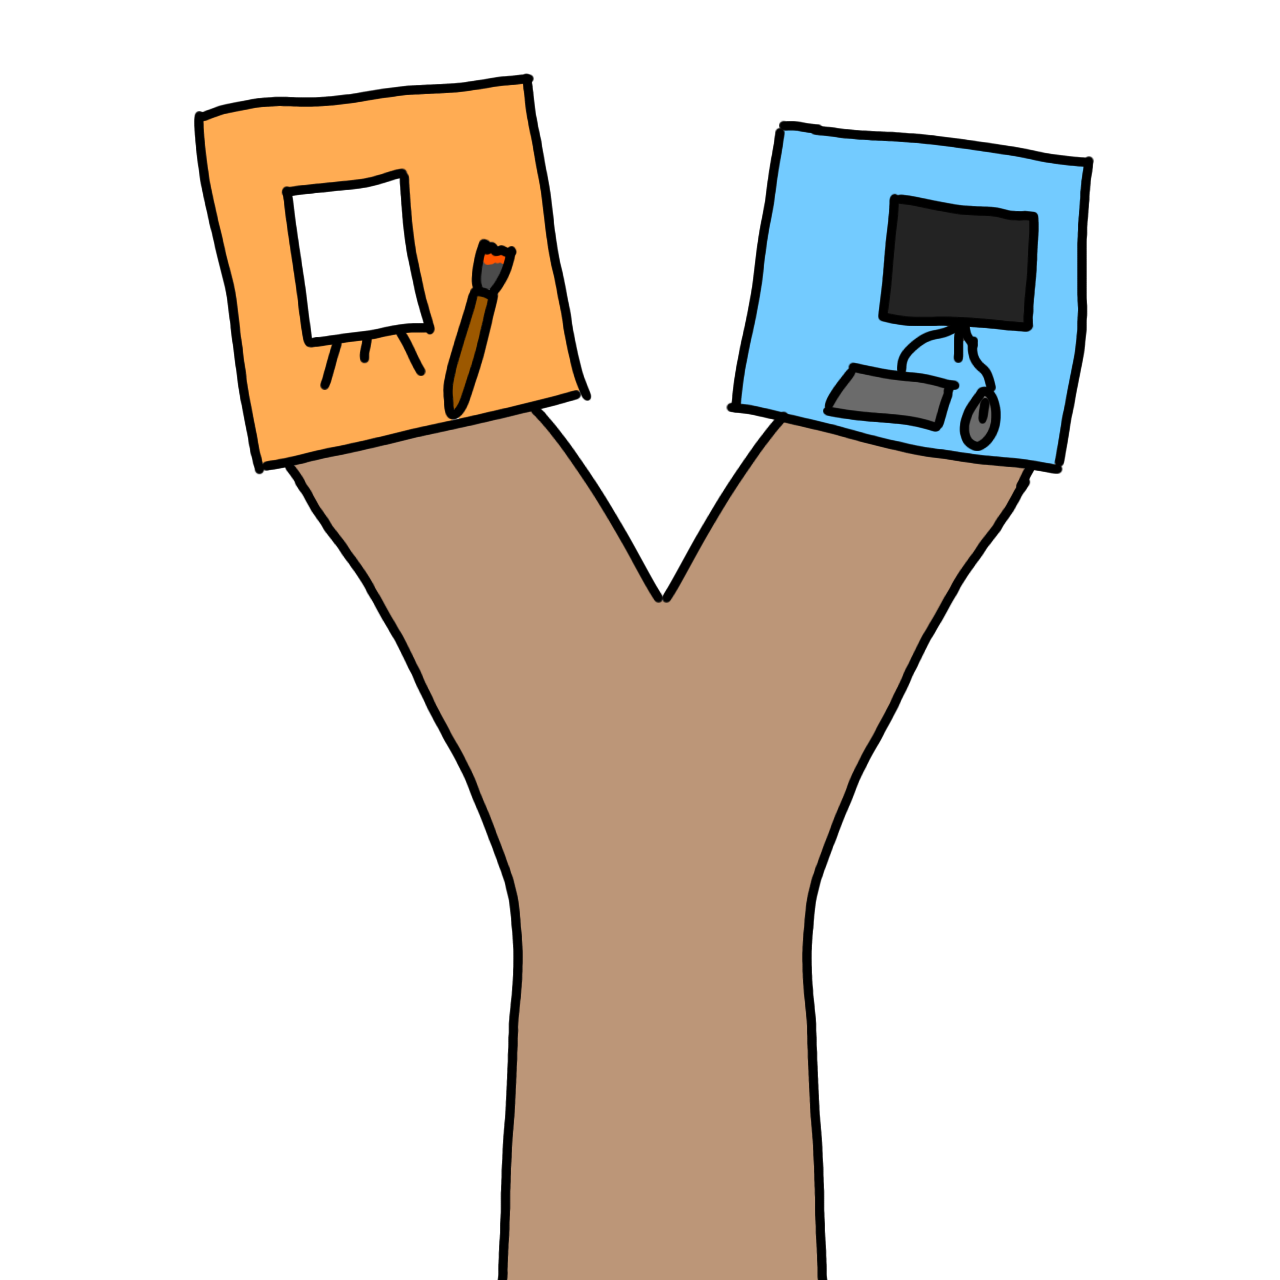 a light brown crossroads. The left side leads to an orange box with a paintbrush and canvas. The right side leads to a blue box with a computer.